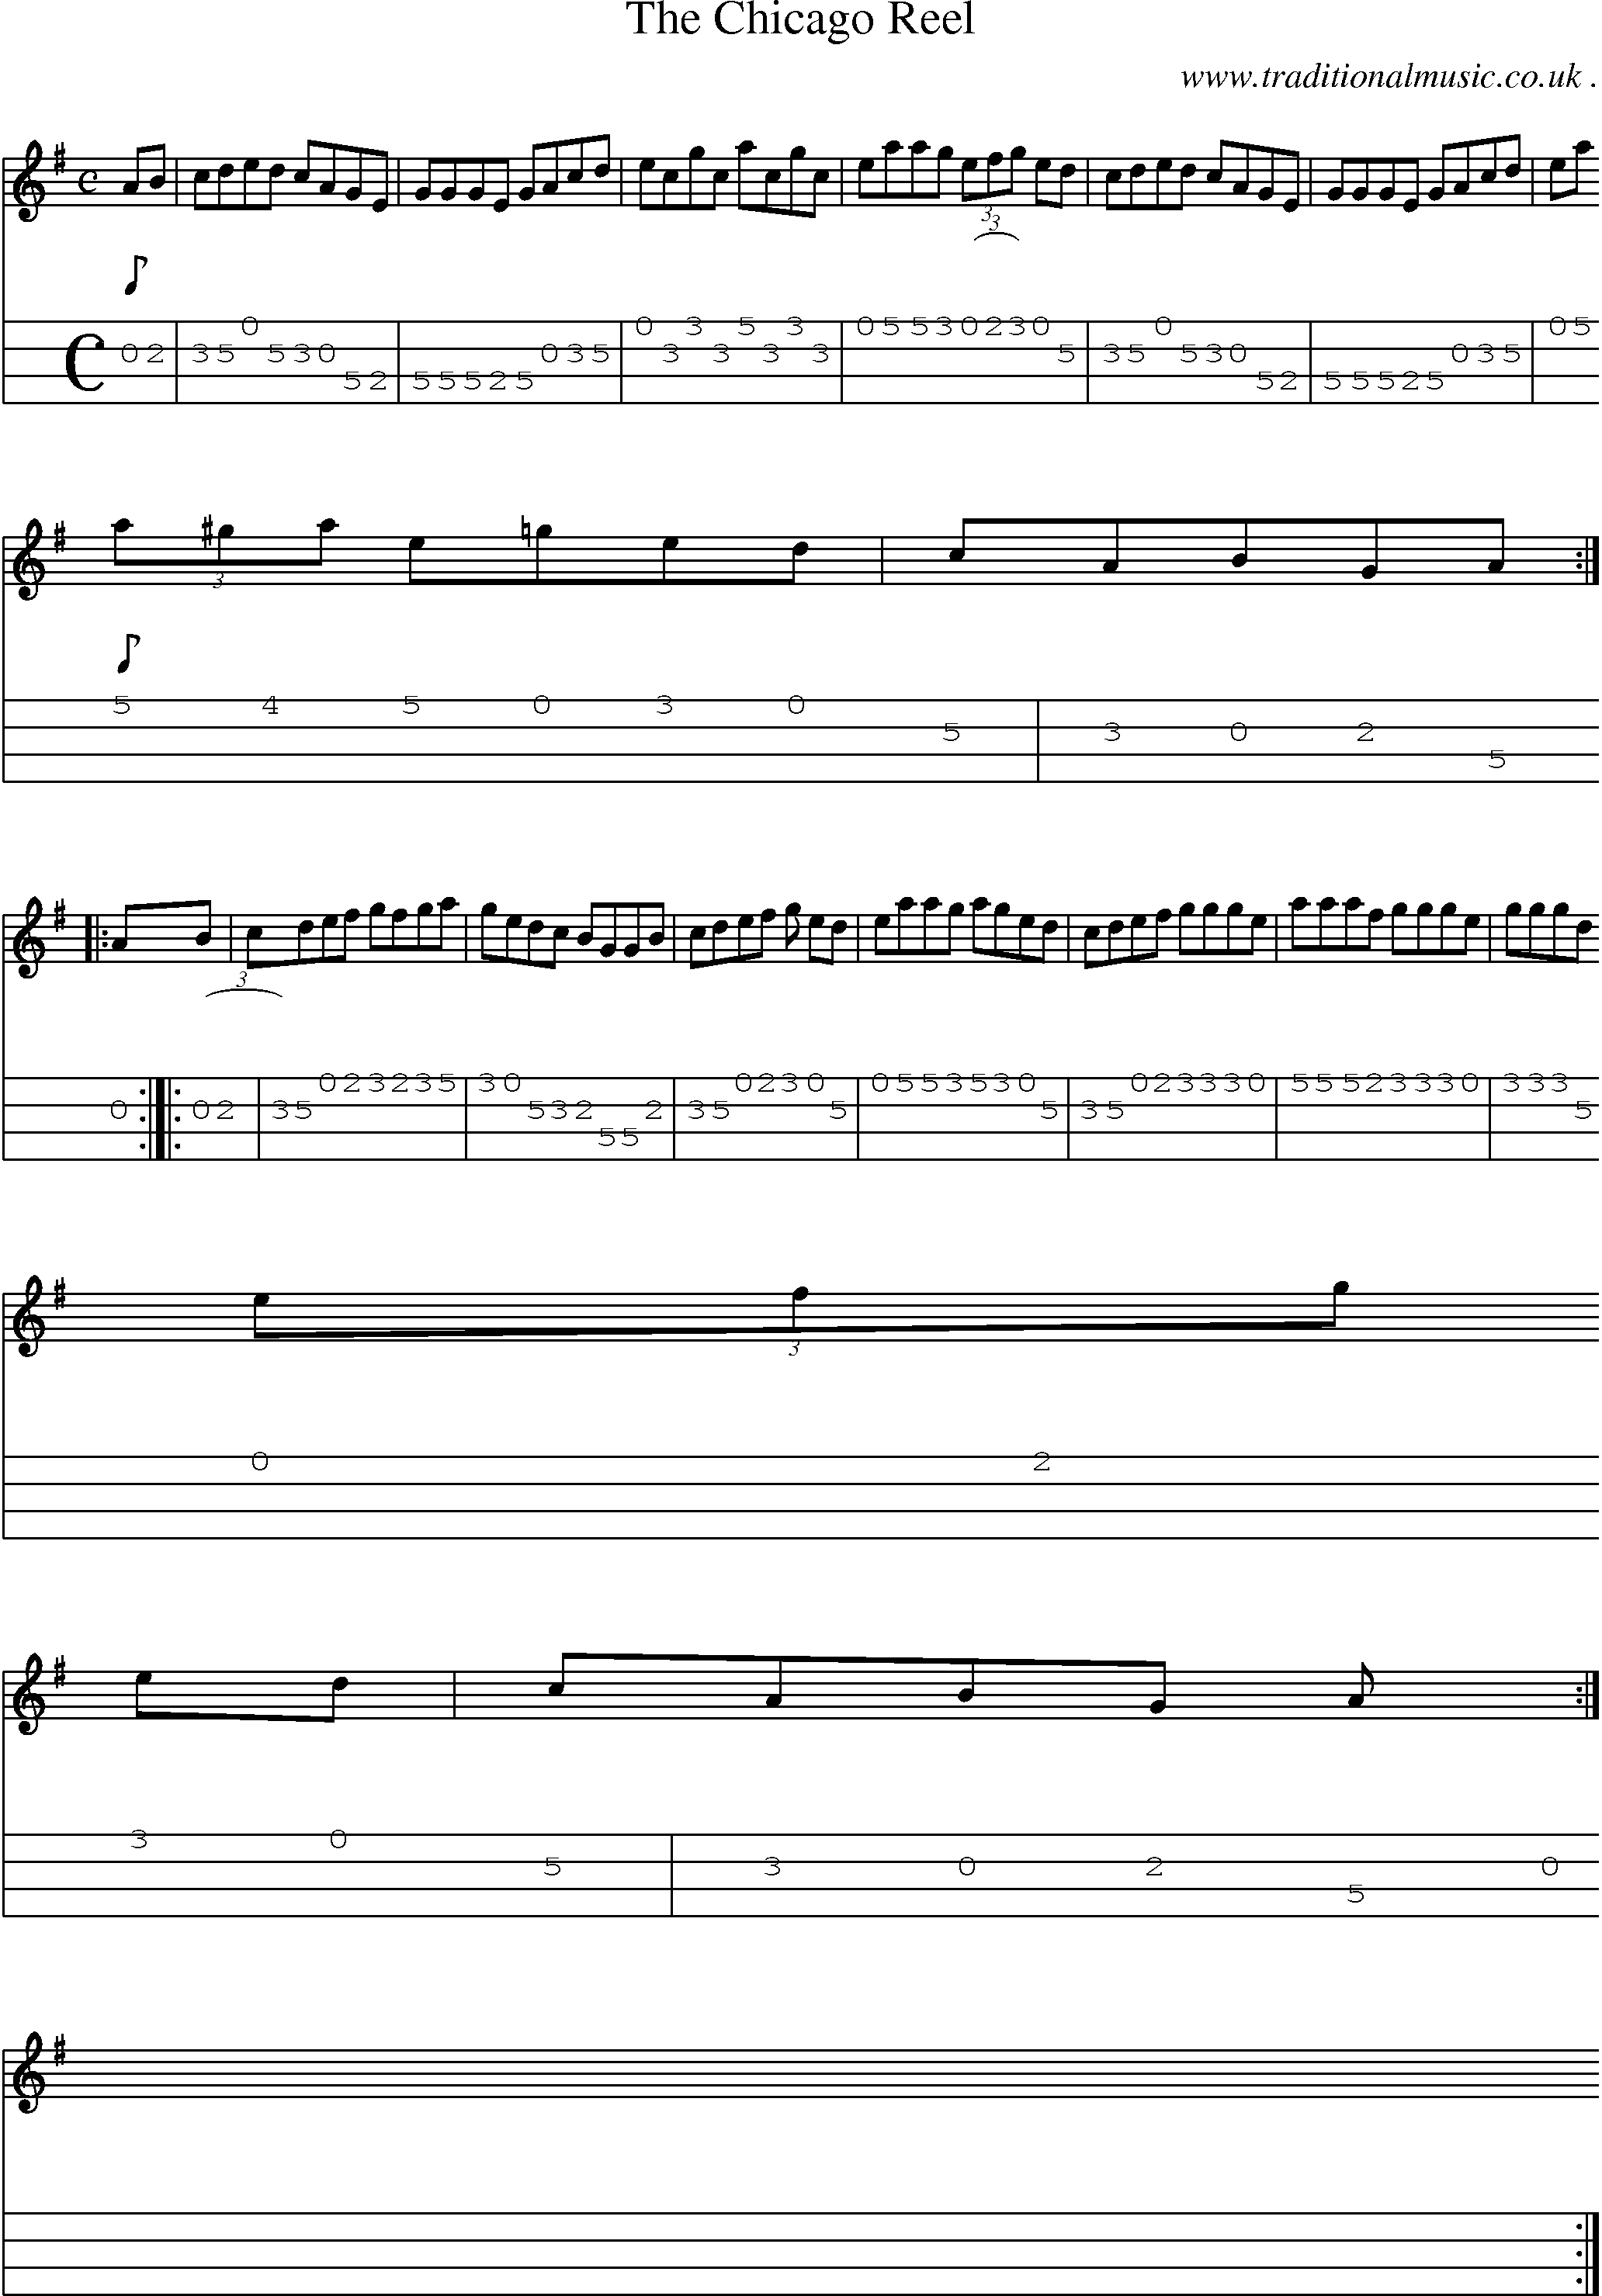 Sheet-Music and Mandolin Tabs for The Chicago Reel